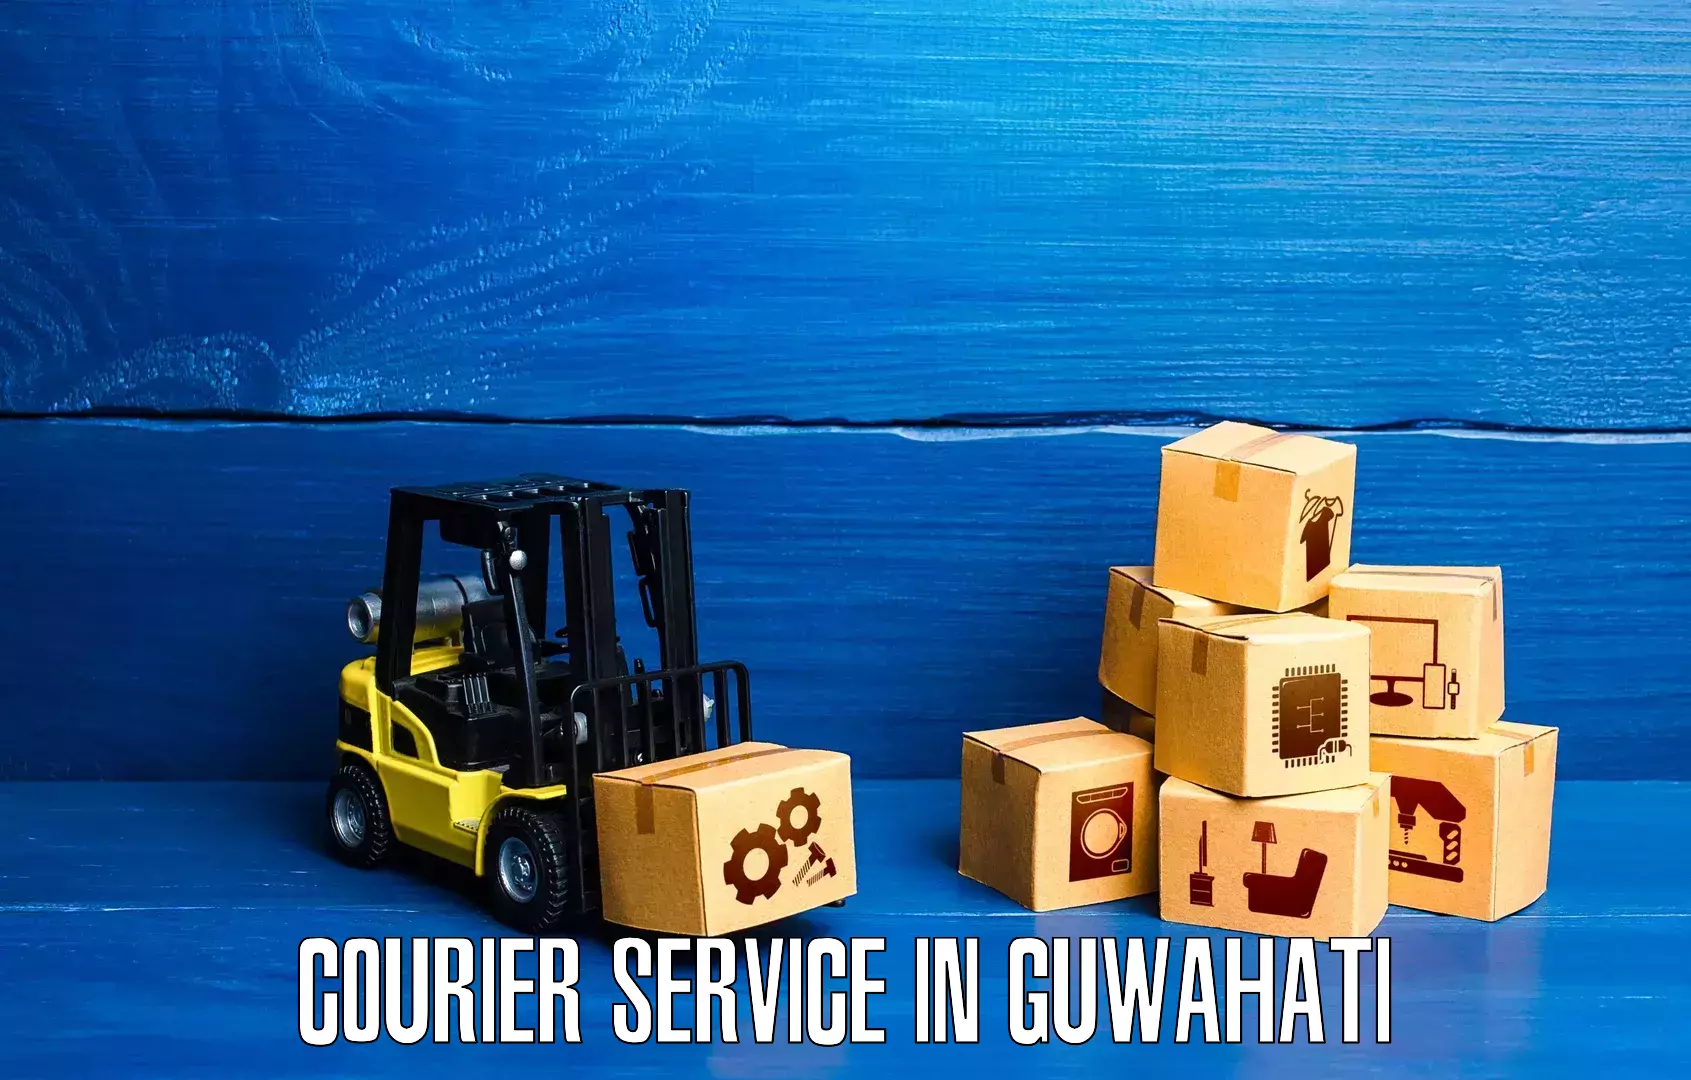 State-of-the-art courier technology in Guwahati